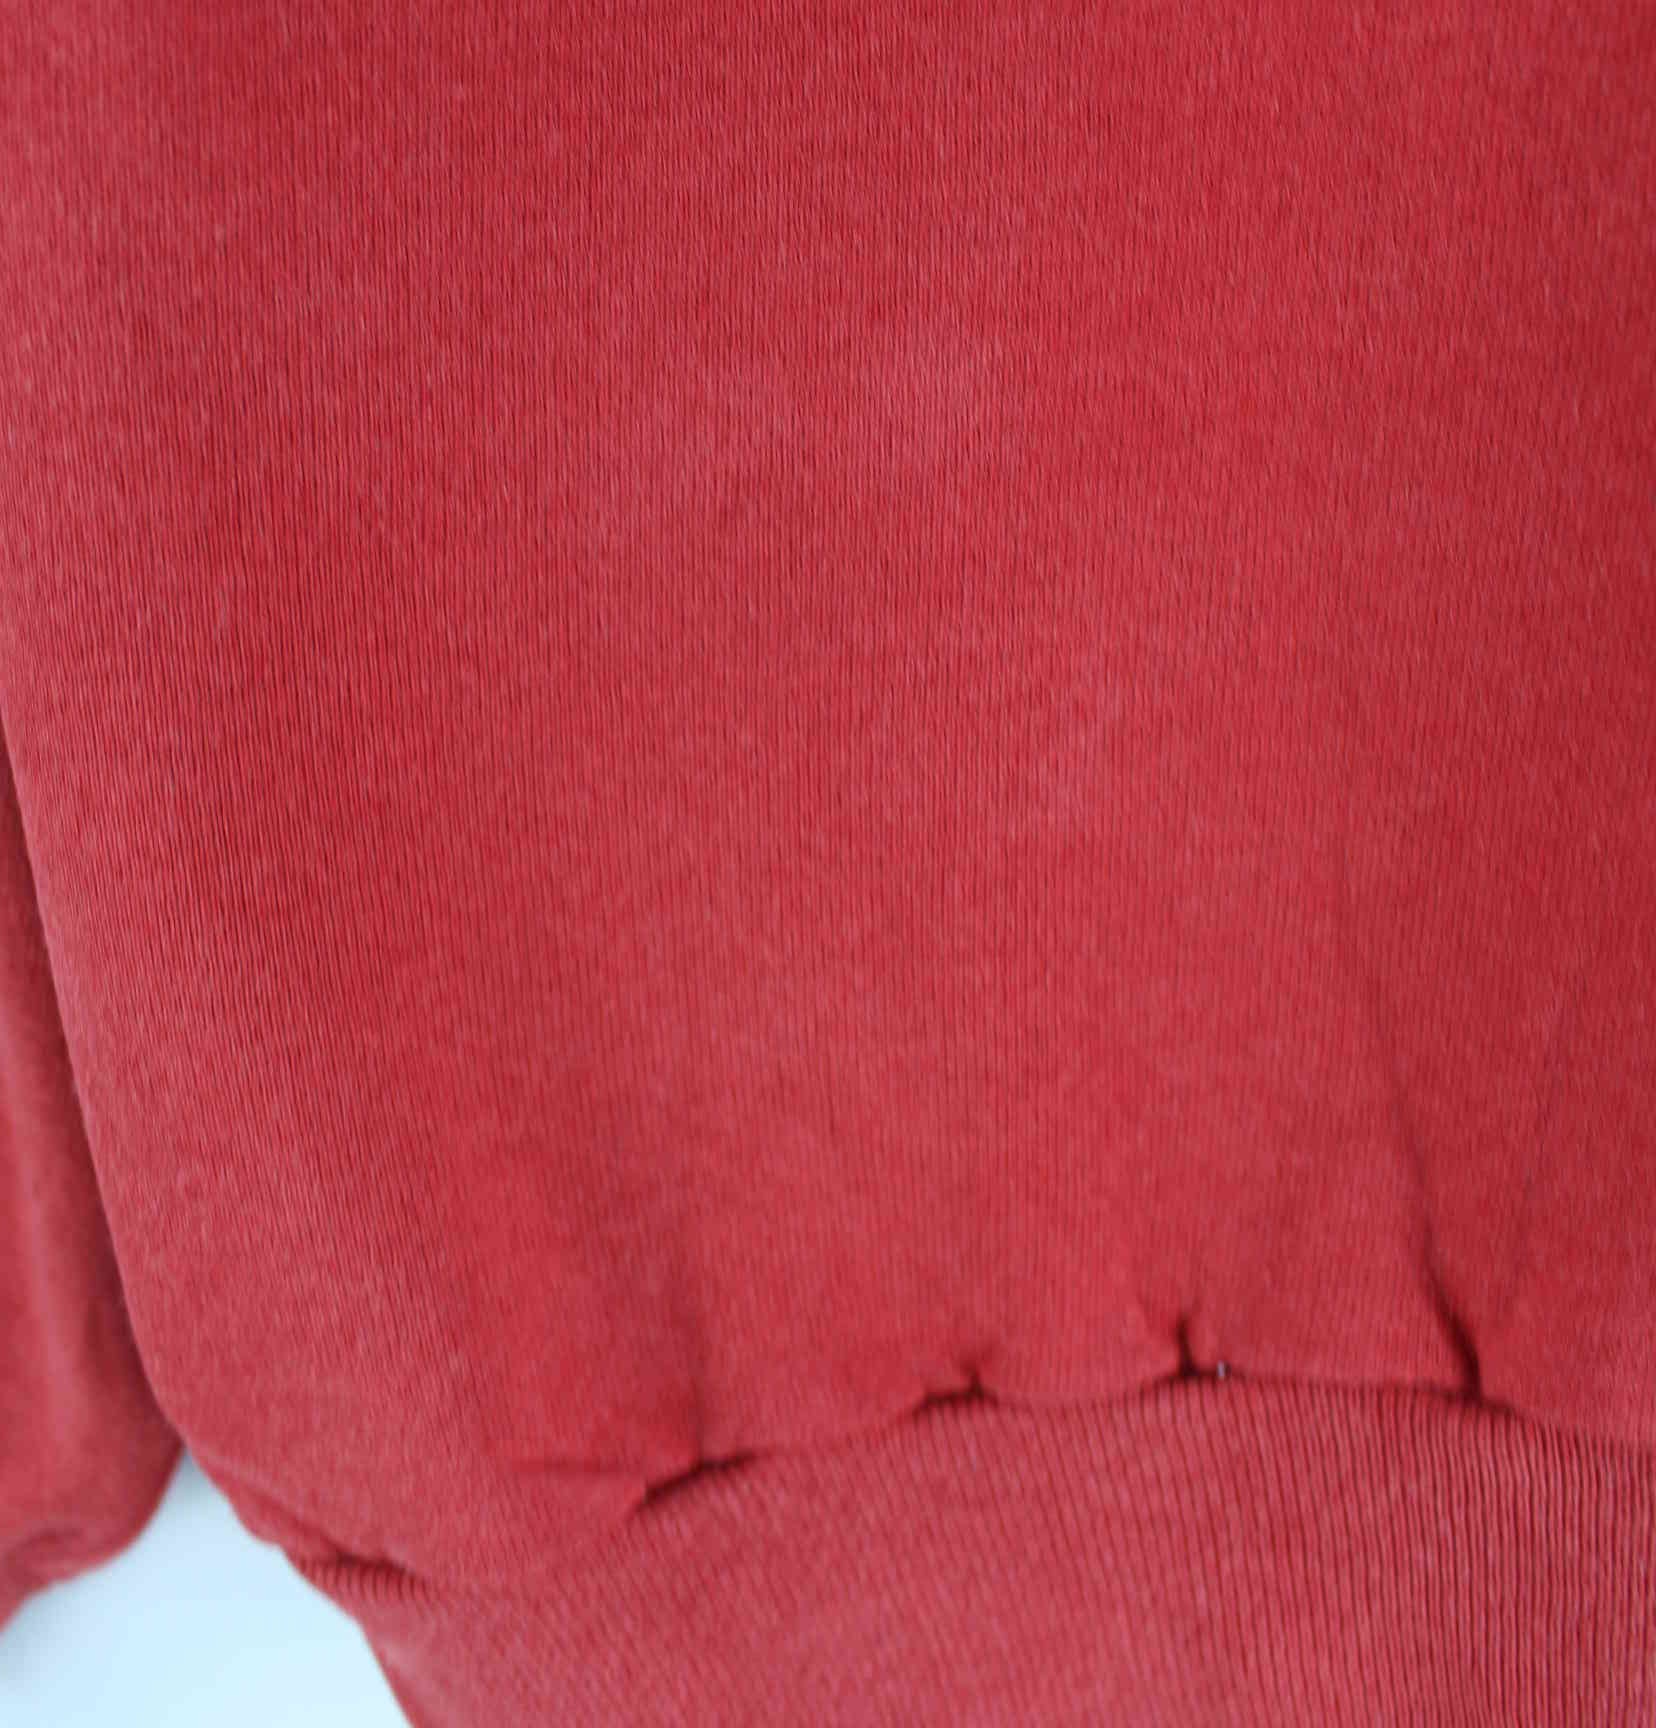 Jerzees 90s Vintage Dog Embroidered Sweater Rot XL (detail image 4)